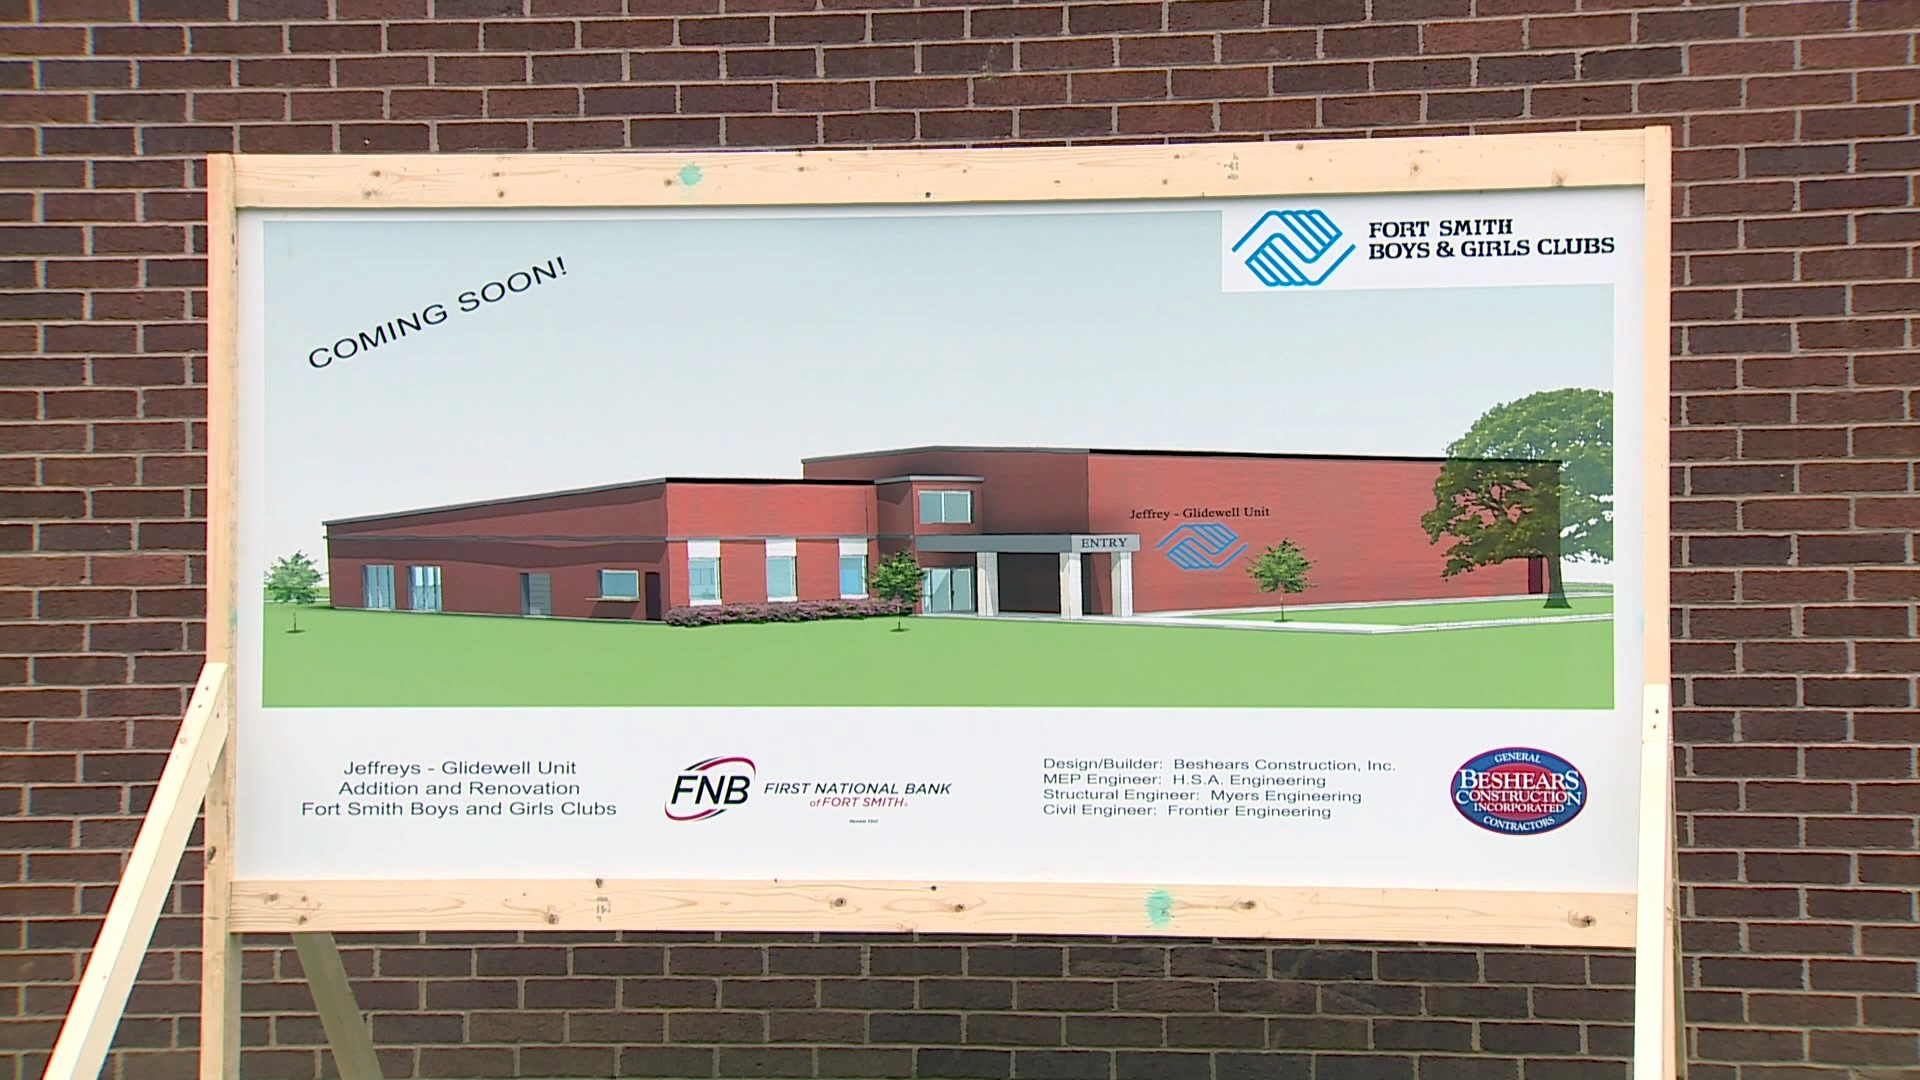 The Fort Smith Boys and Girls Club is one step closer to a $3 million expansion at the Jeffrey unit.